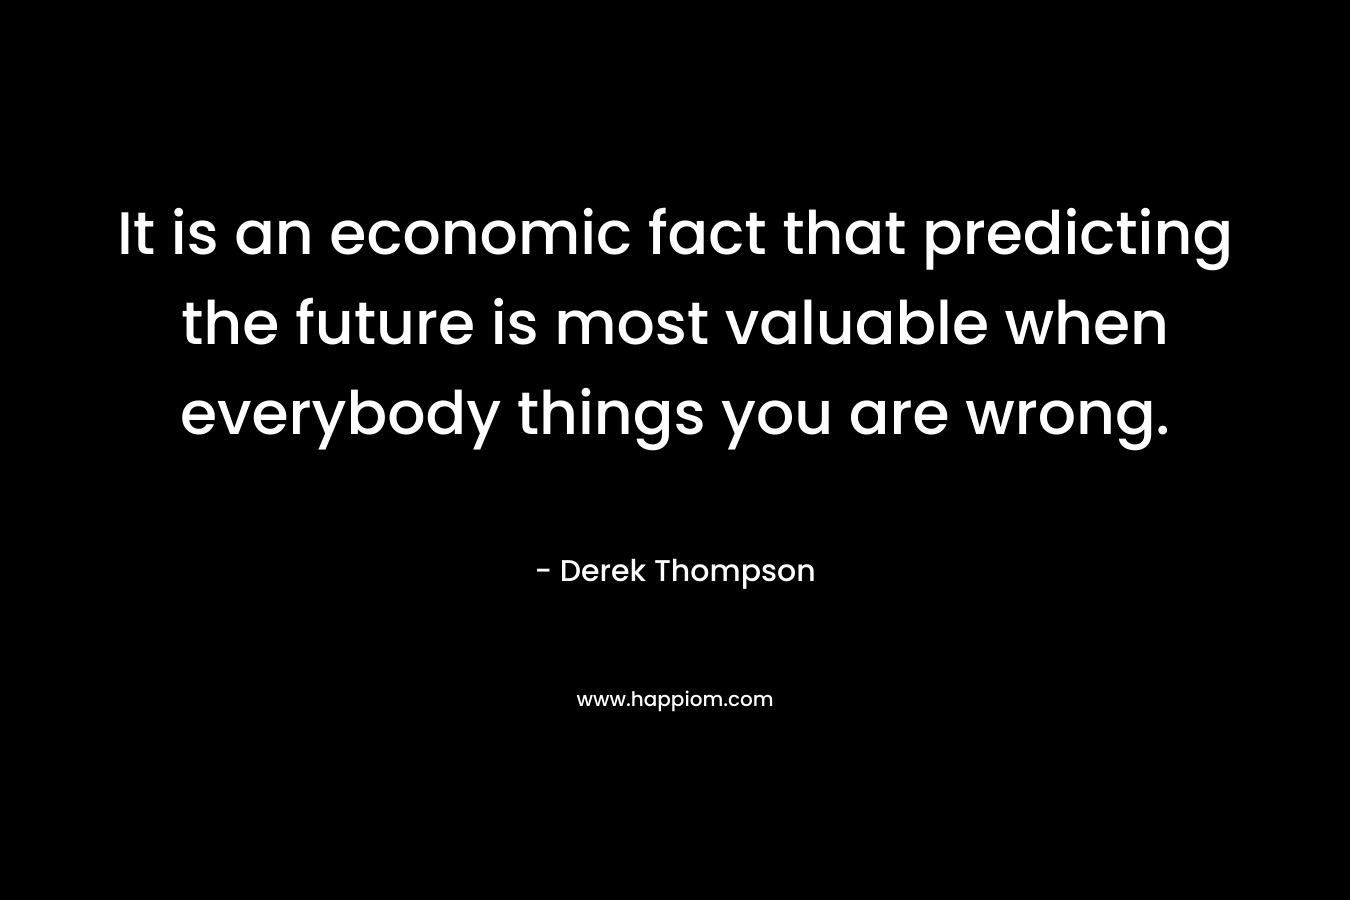 It is an economic fact that predicting the future is most valuable when everybody things you are wrong.